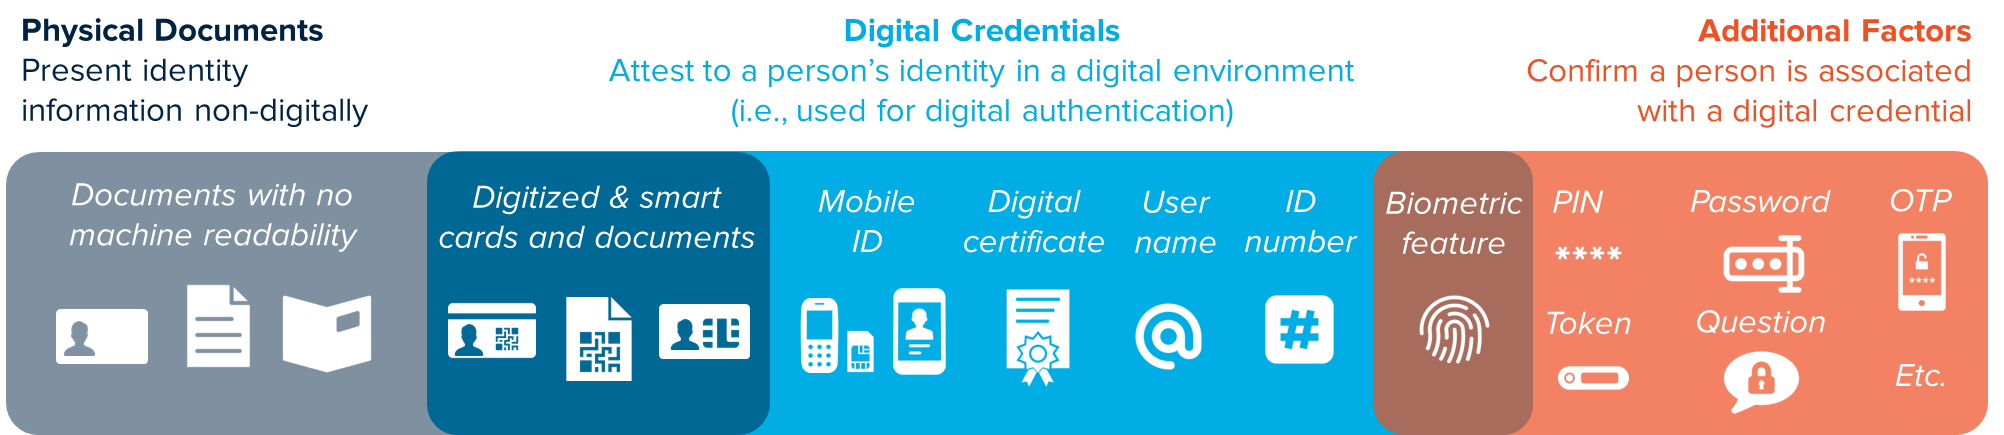 Types of credentials and authenticators